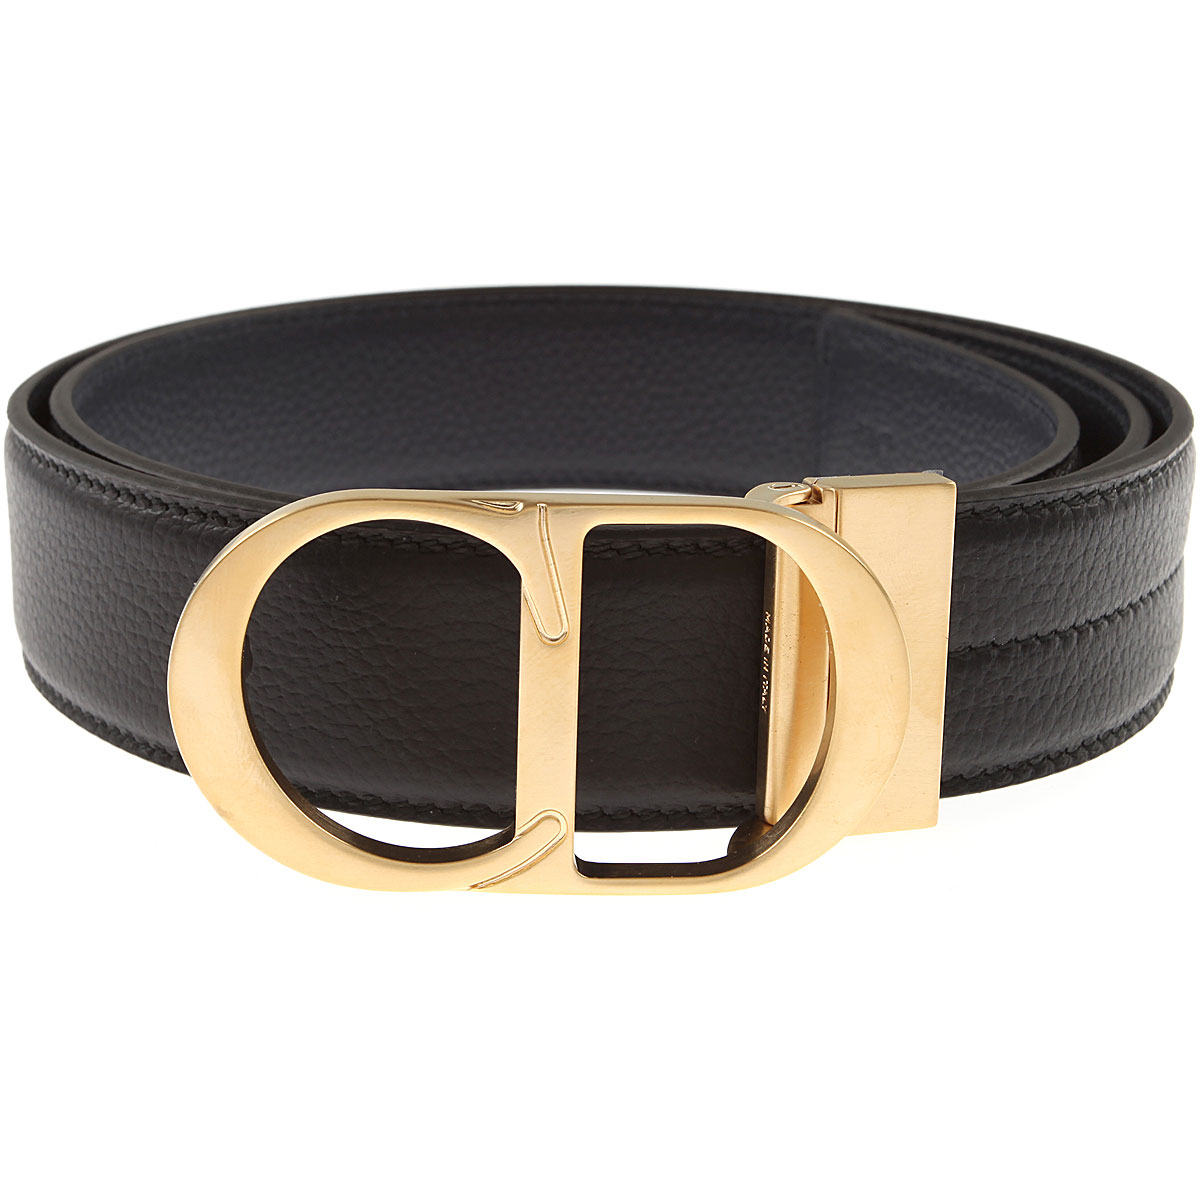 Mens Belts Christian Dior, Style code: 40440stab-965100-